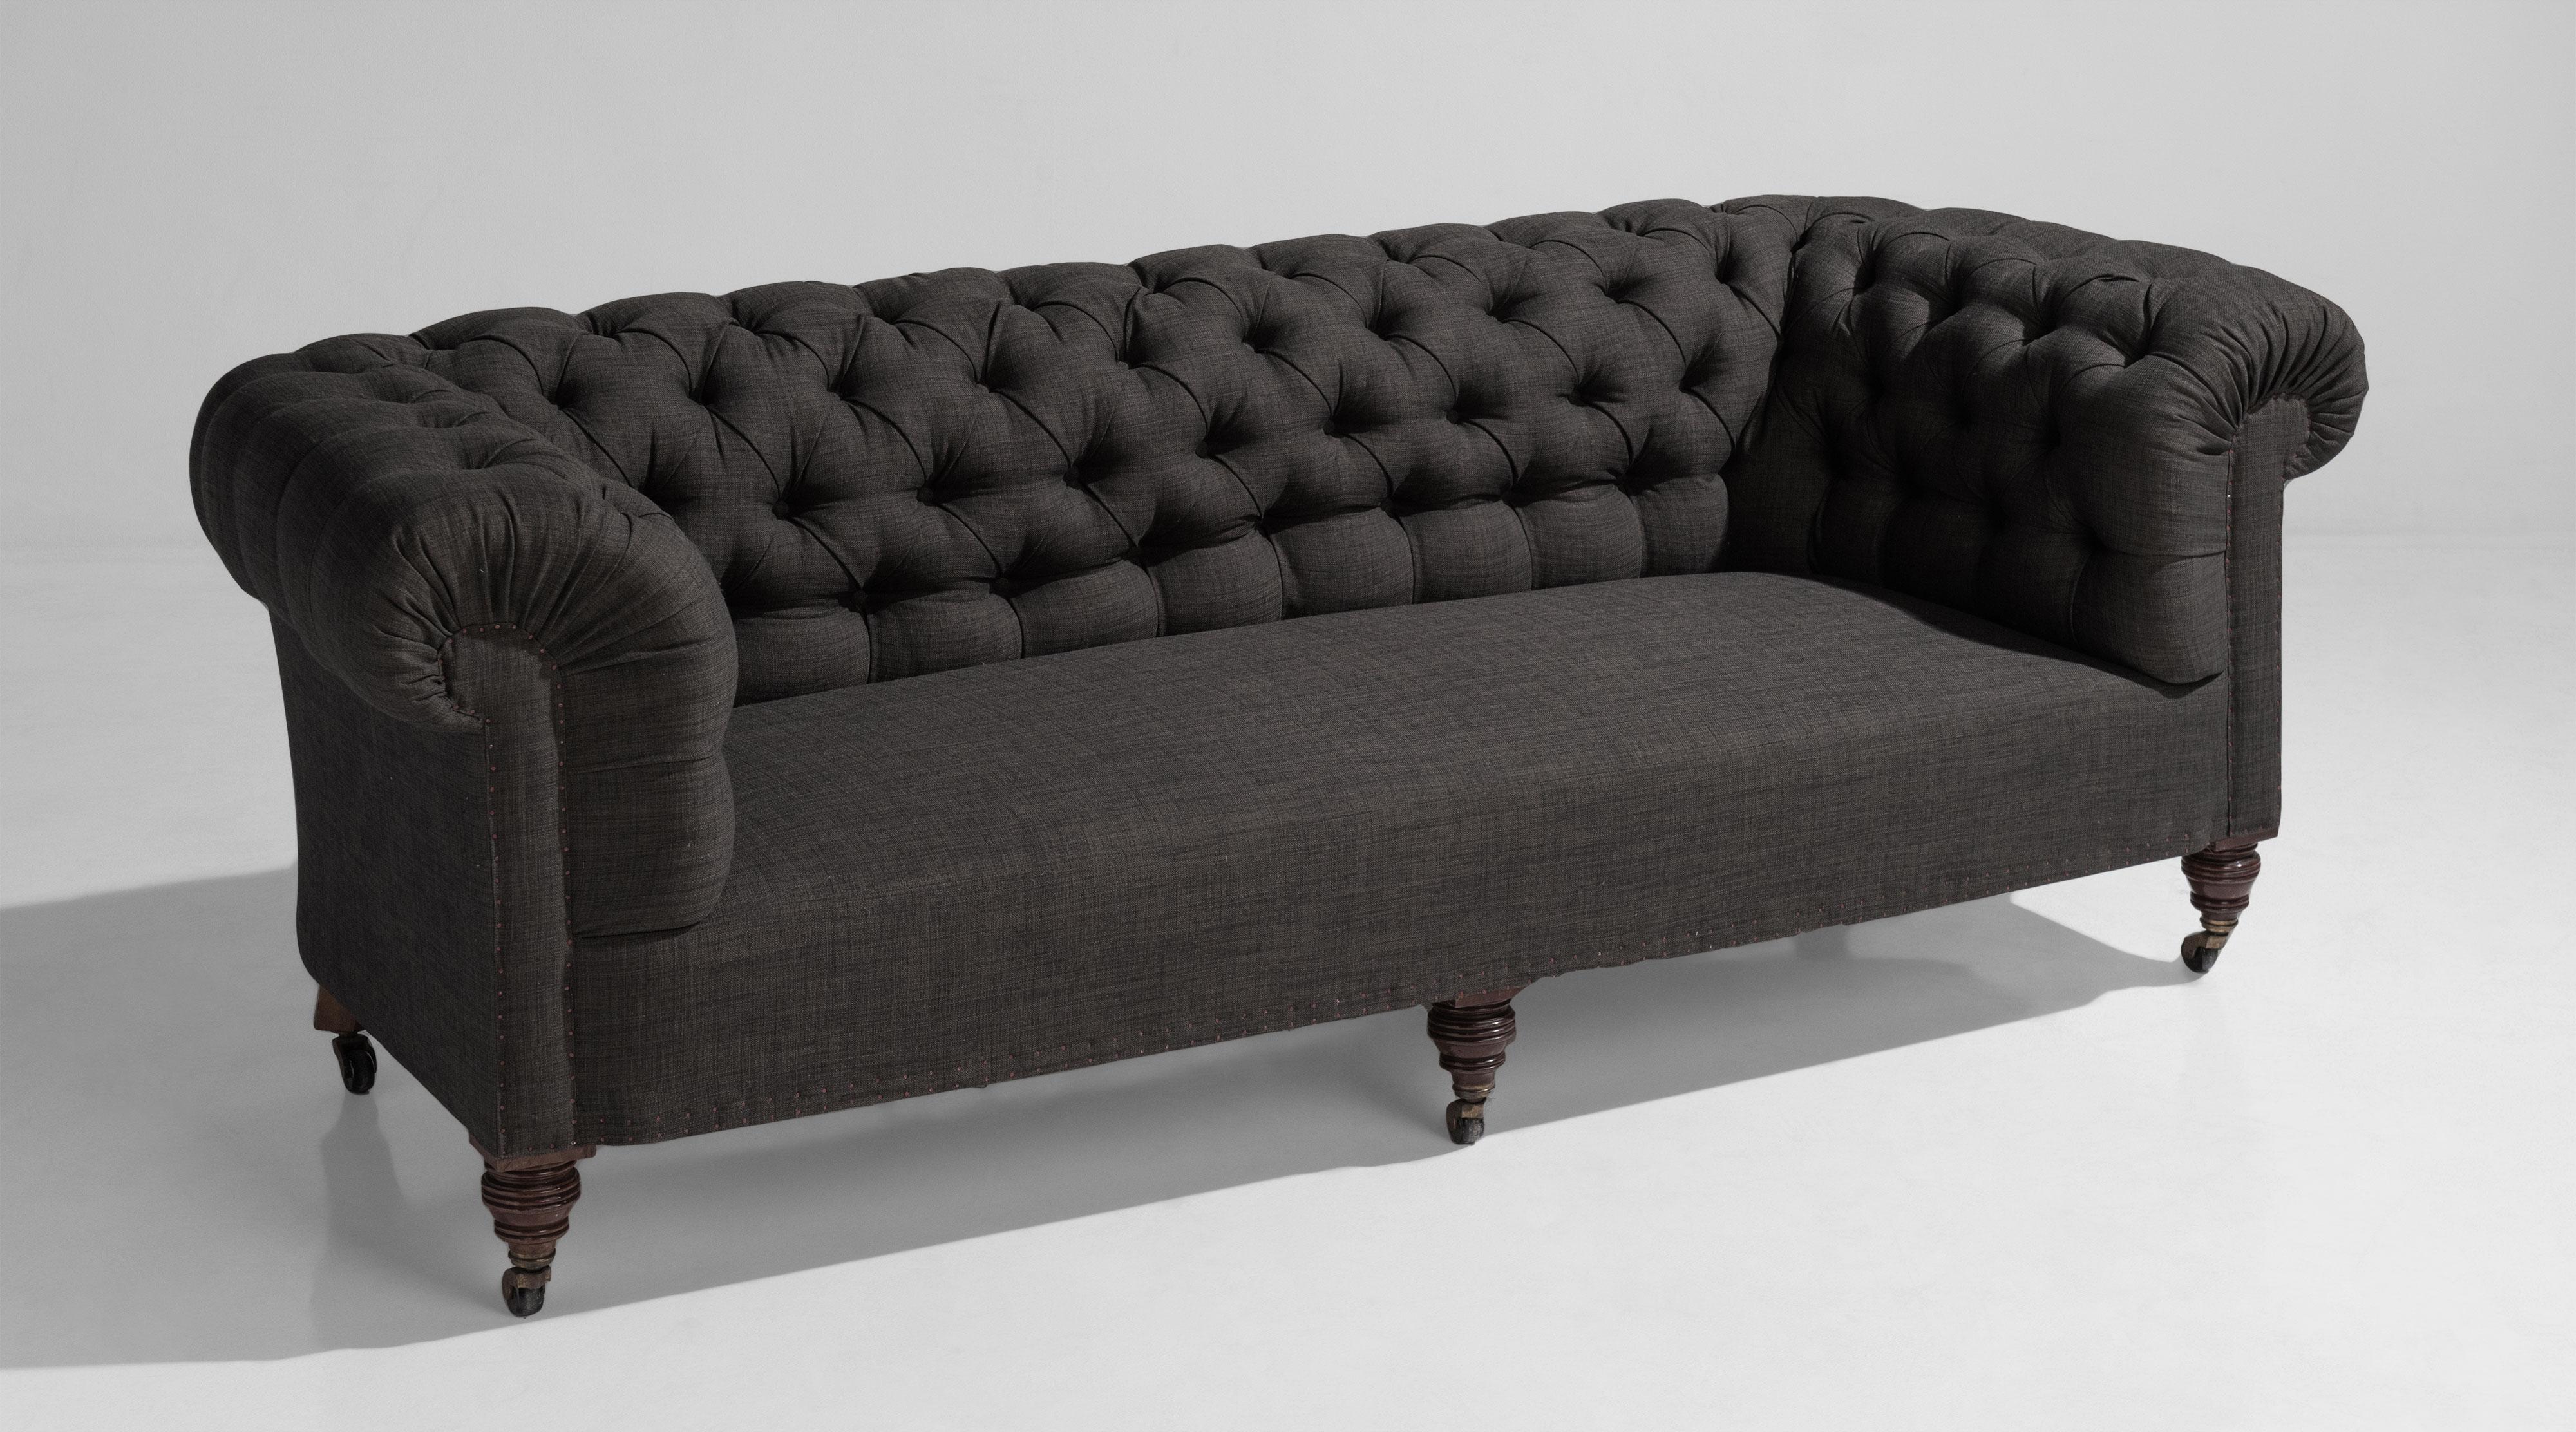 Country house chesterfield sofa, England, circa 1890.

Newly upholstered on original turned walnut legs.